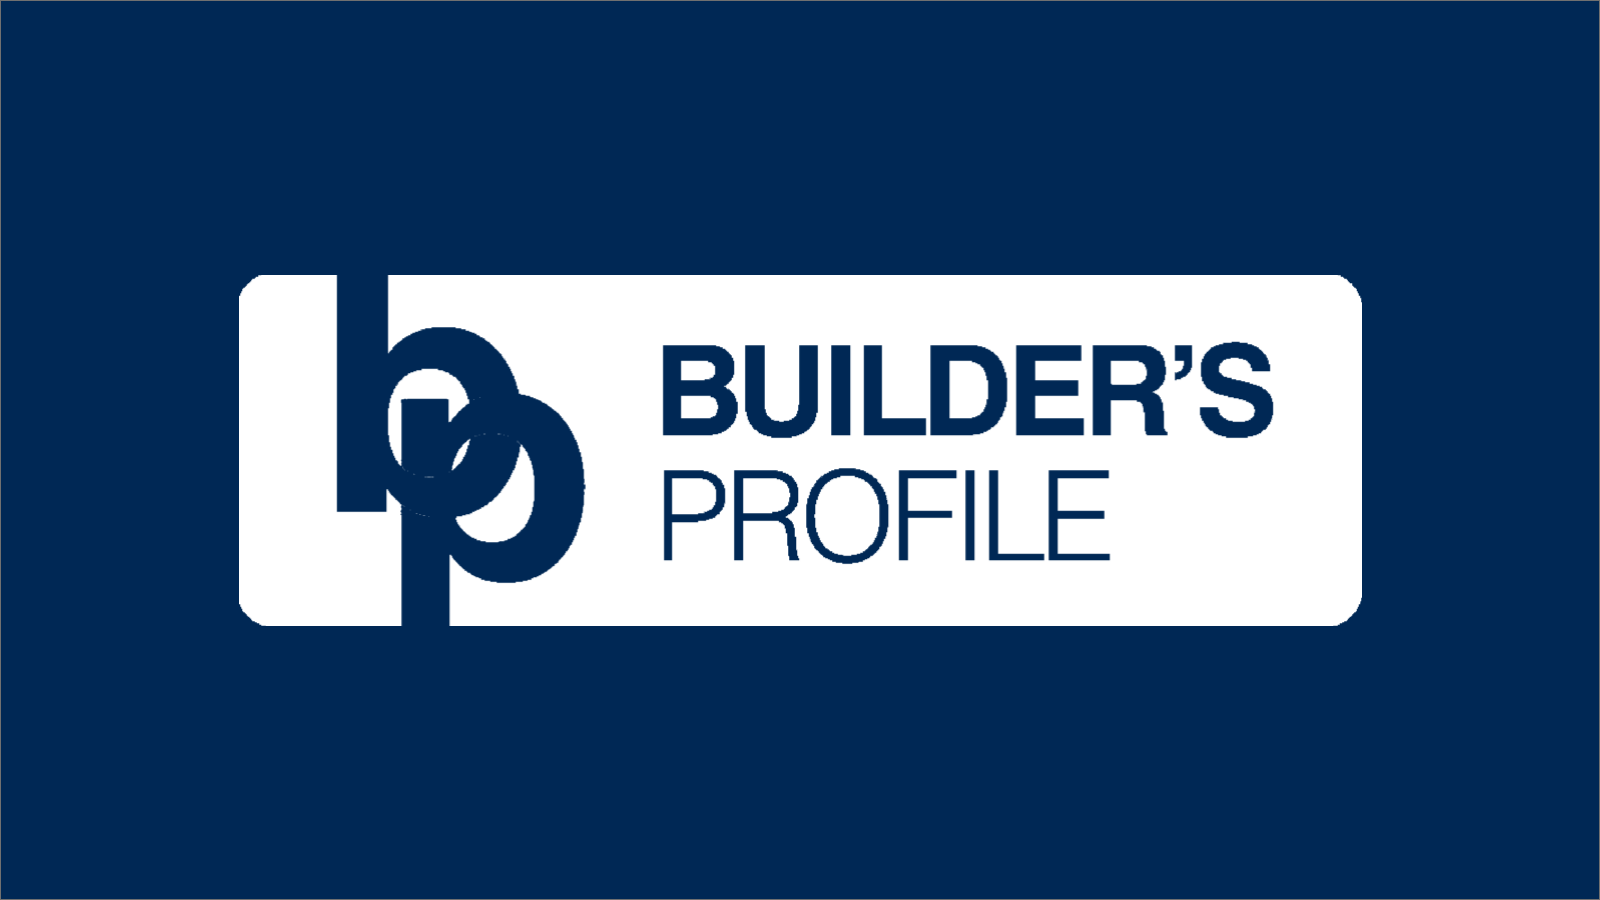 Builders profile accreditation - security solutions